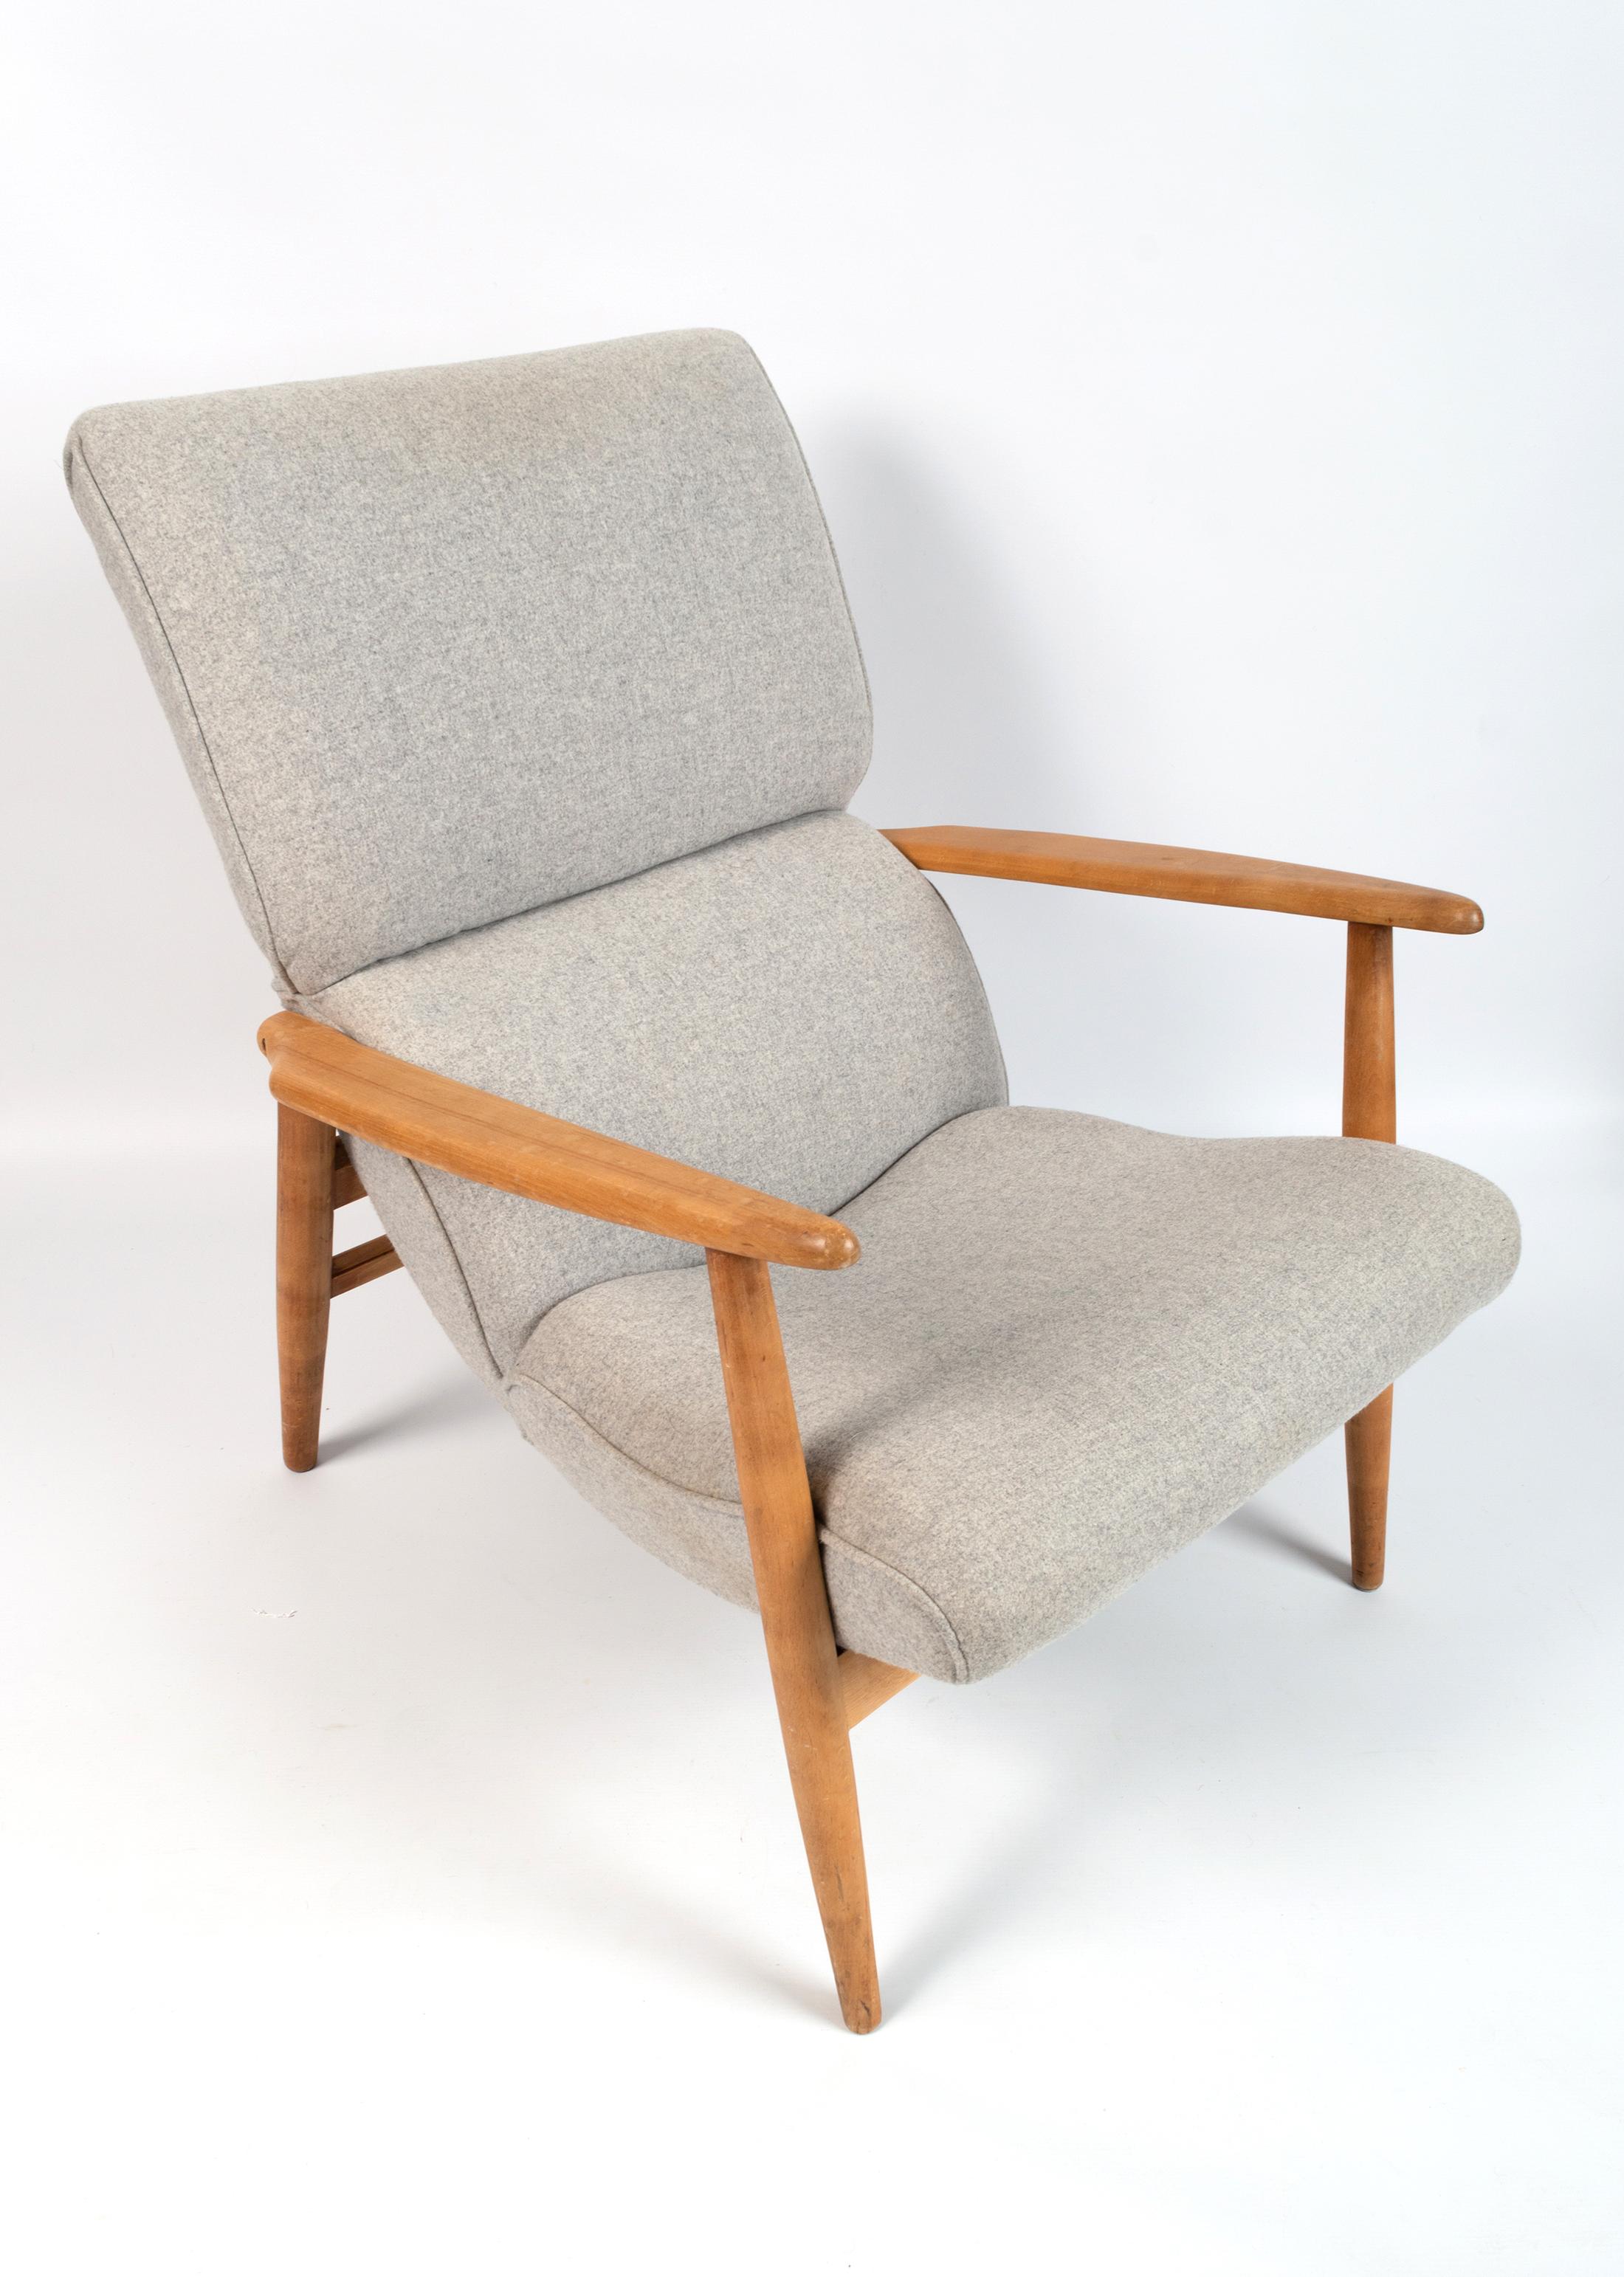 20th Century Pair of Mid-Century Danish Lounge Chairs Armchairs Denmark, C.1950 For Sale